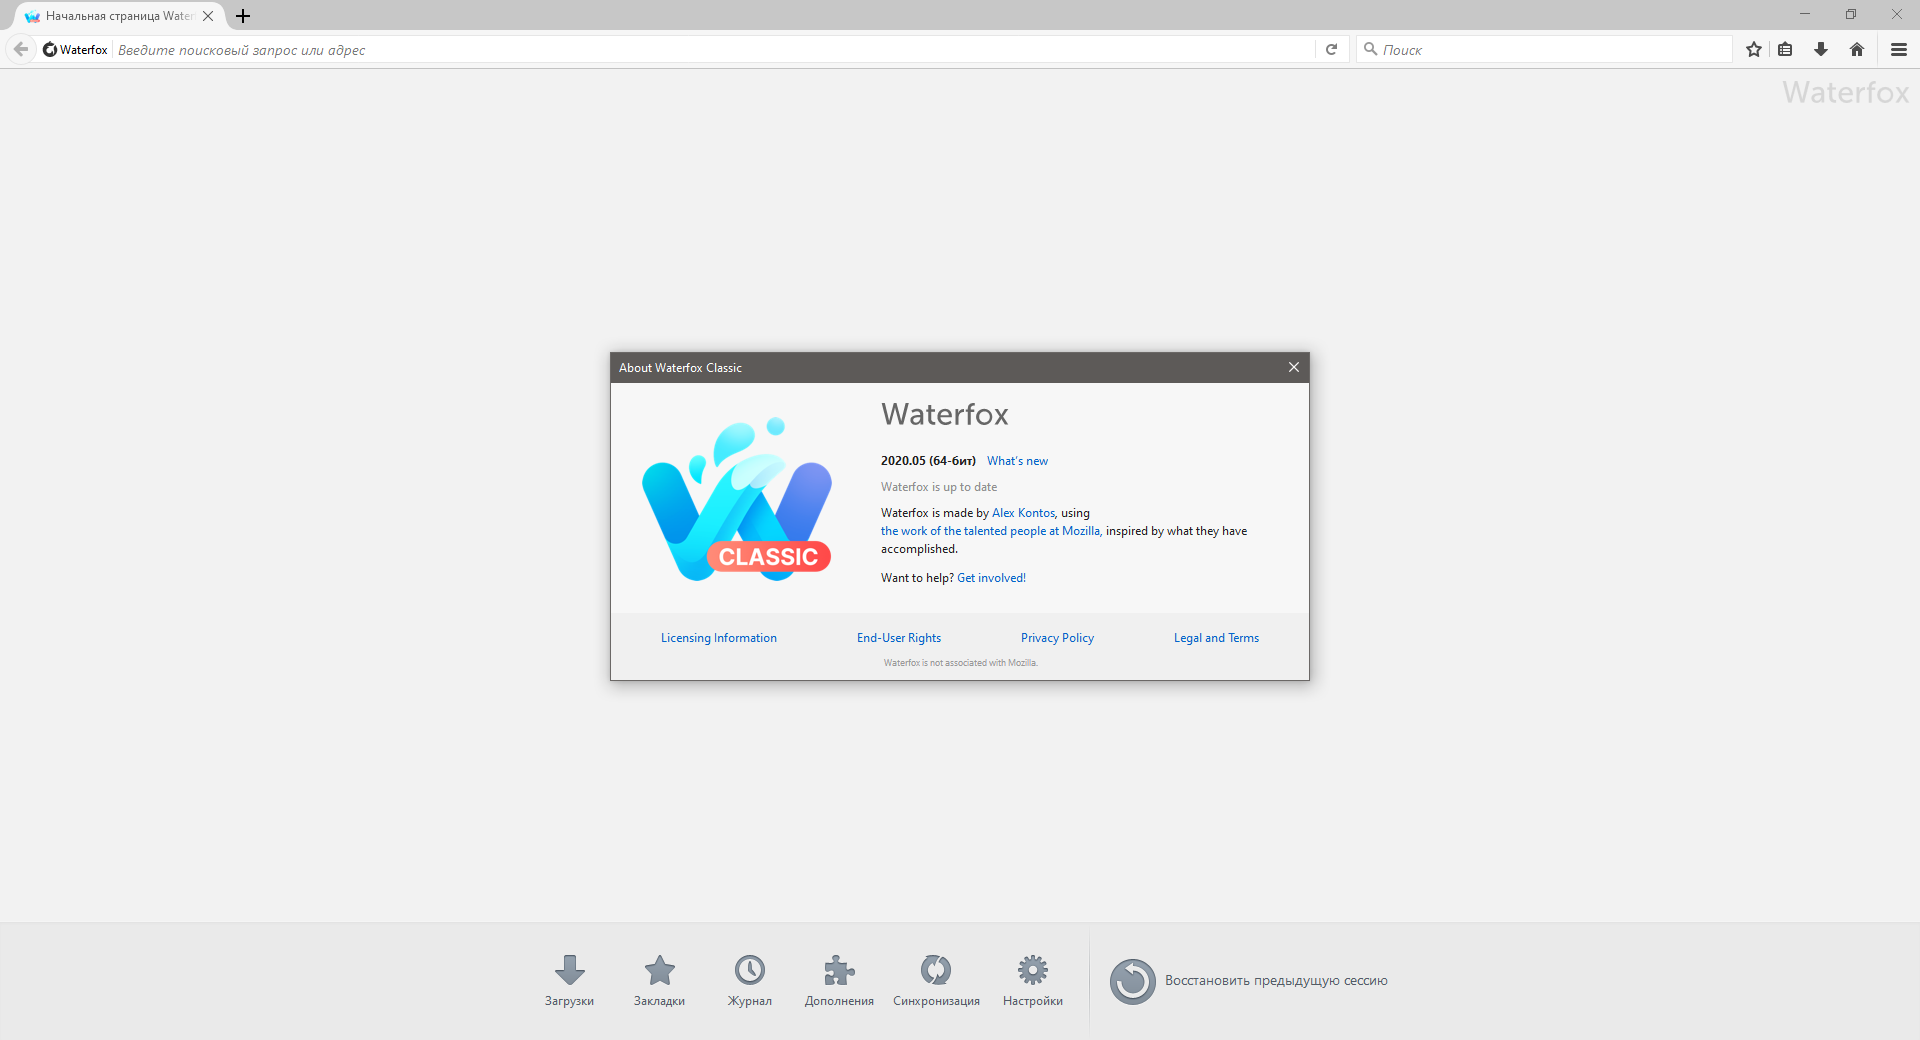 Waterfox Current G5.1.9 instaling